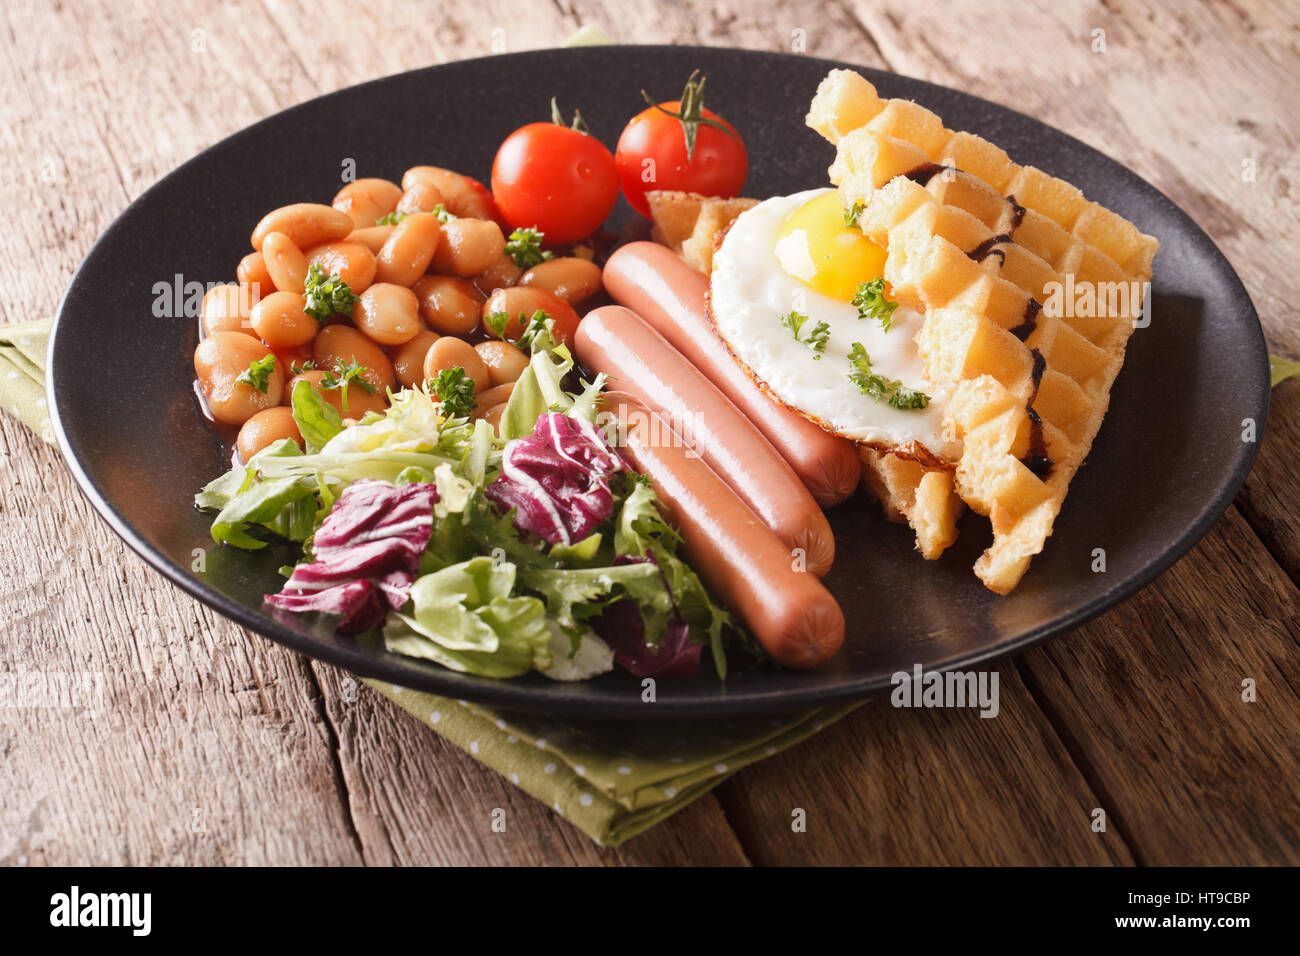 Fried waffles with egg, sausages, beans and fresh salad close-up on a plate. horizontal Stock Photo